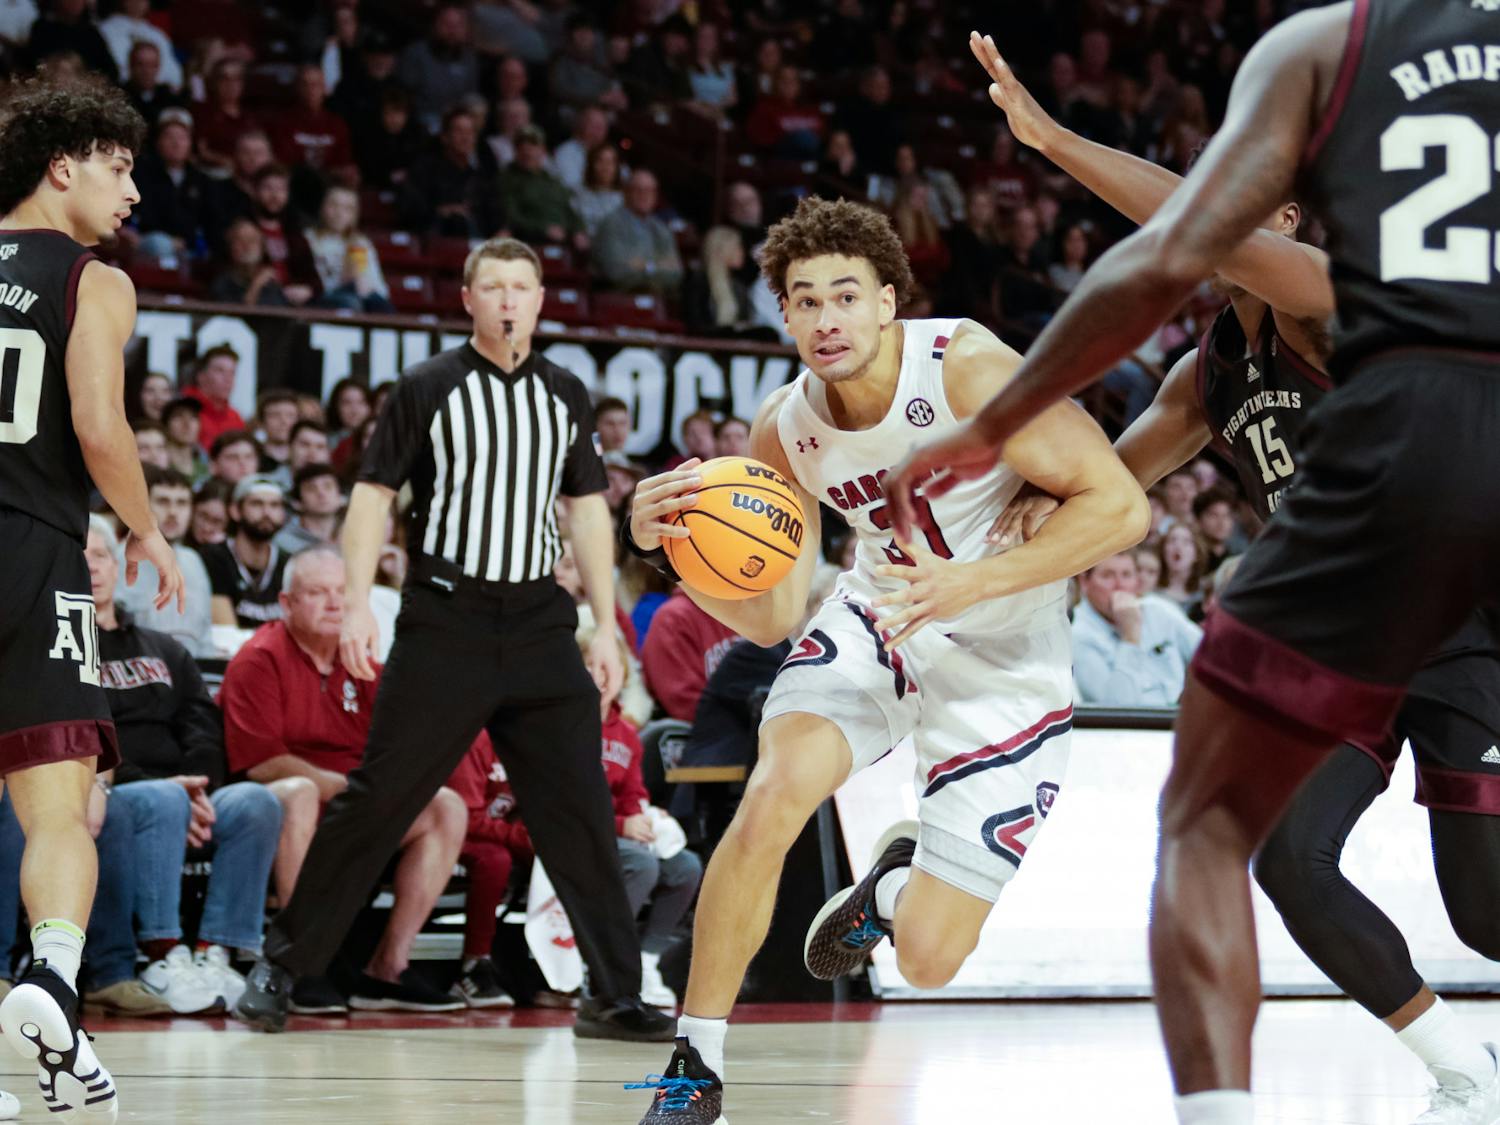 junior forward Benjamin Bosmans-Verdonk dribbles the ball around the defender from Texas A&M at Colonial Life Arena on Jan. 14, 2023. The South Carolina Gamecocks lost the game 53 to 94.